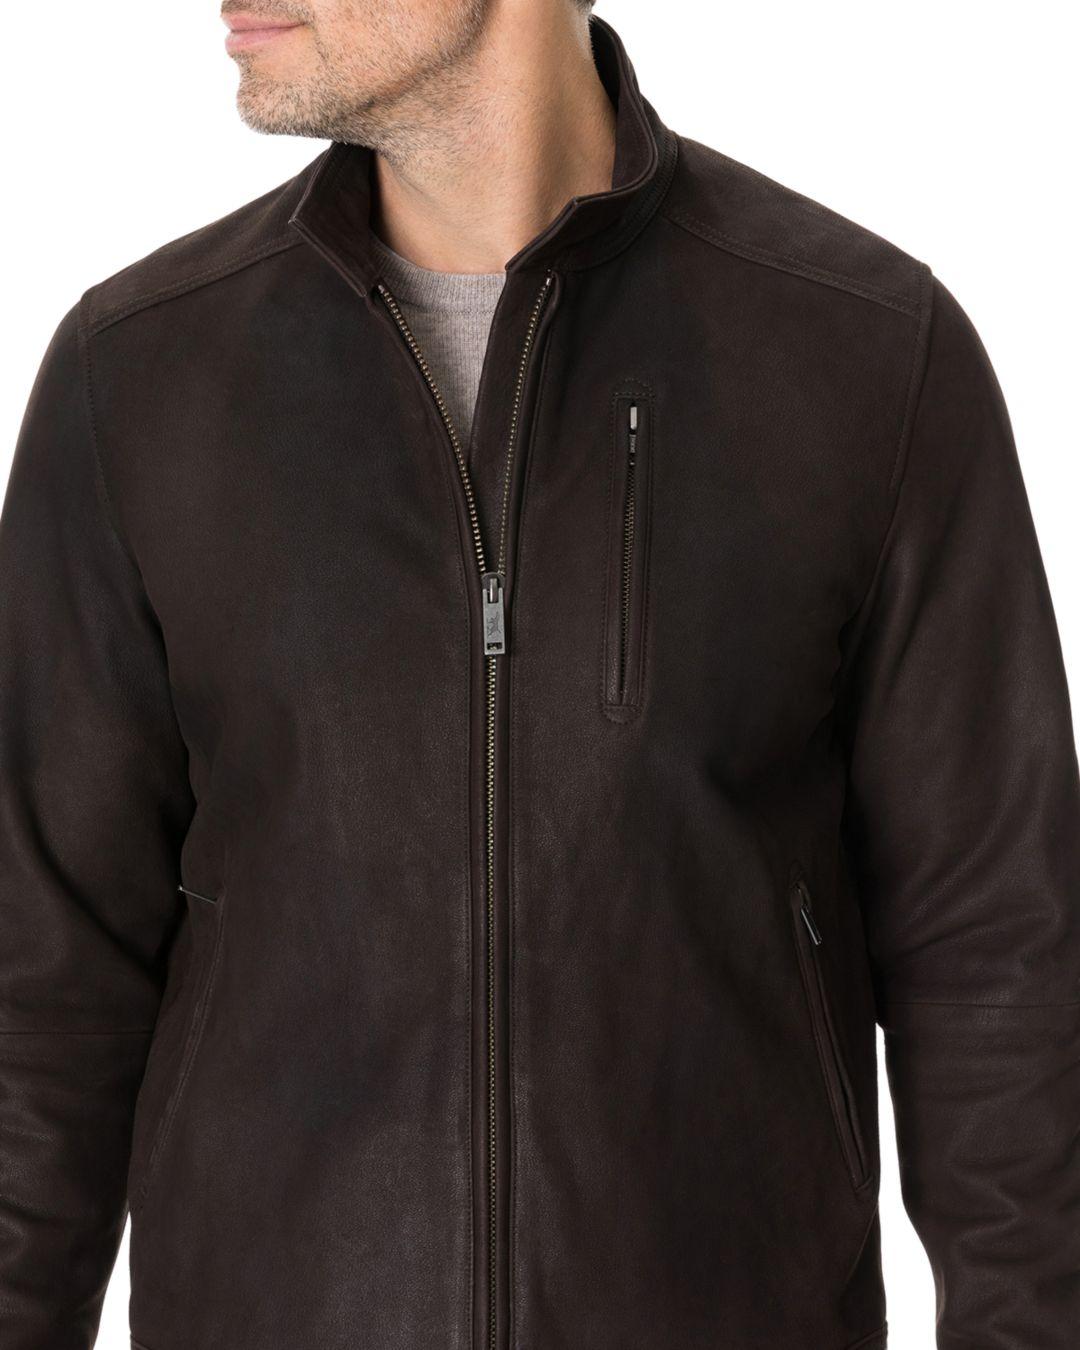 Rodd & Gunn Westhaven Leather Jacket in Chocolate (Brown) for Men 